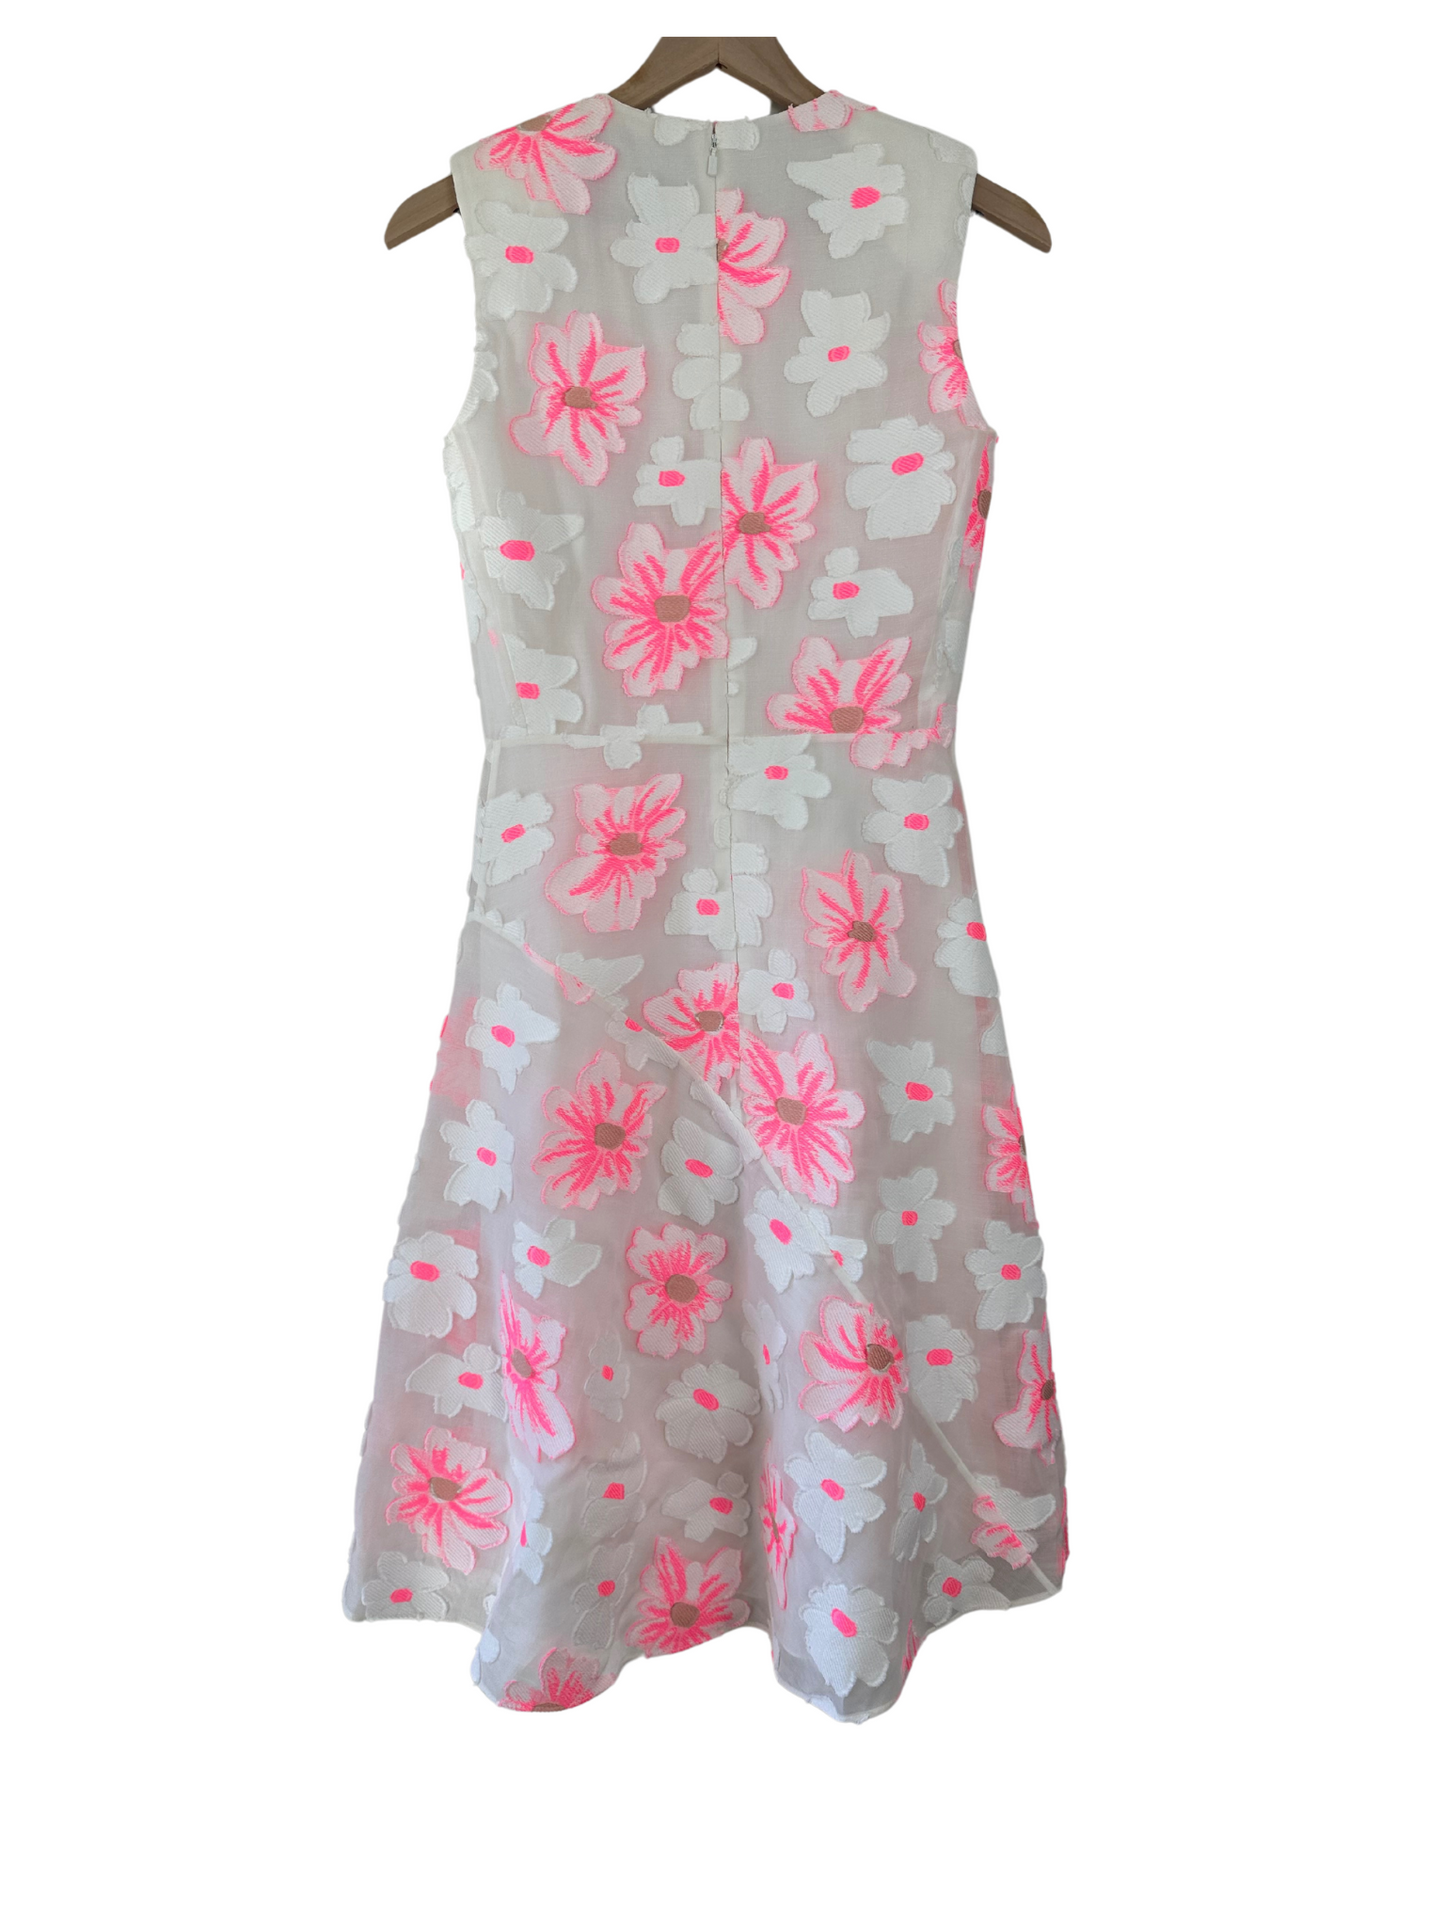 Chloé White and Florescent Pink Floral Embroidered Organza High Low Dress Size 38